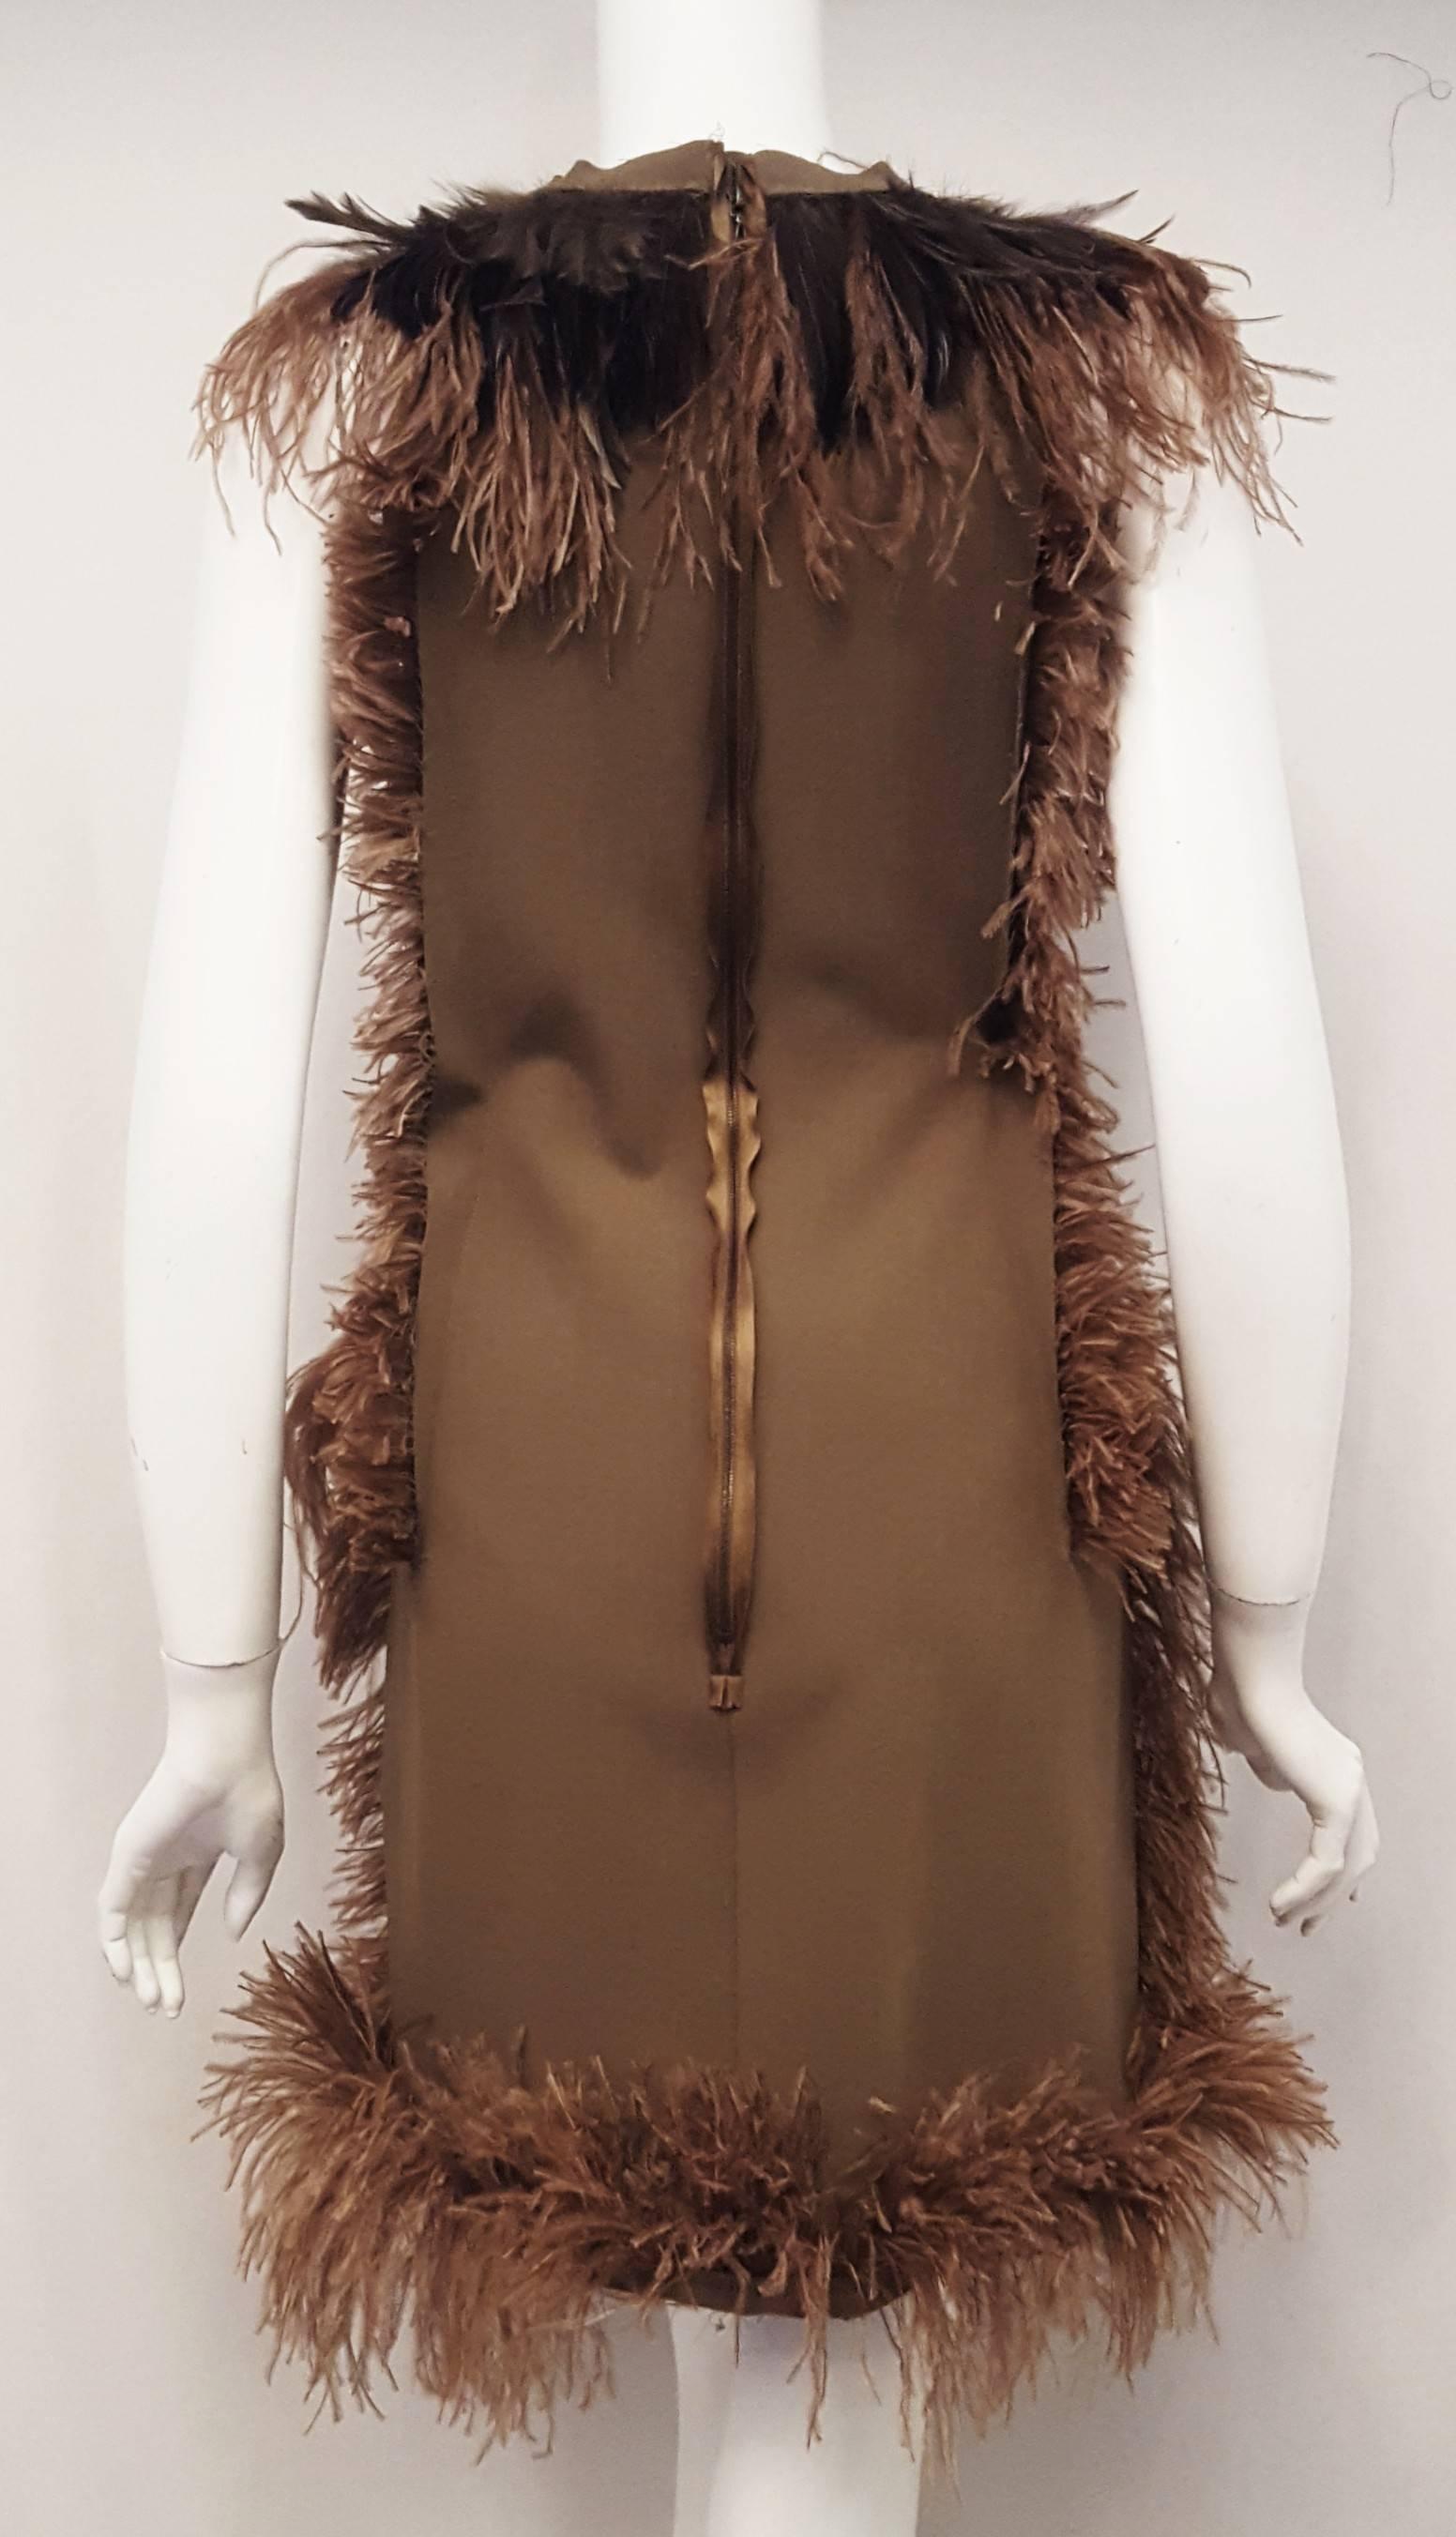 Lanvin Khaki Green Inside Out Winter 2010 Runway Dress with Ostrich Feathers  In Excellent Condition For Sale In Palm Beach, FL